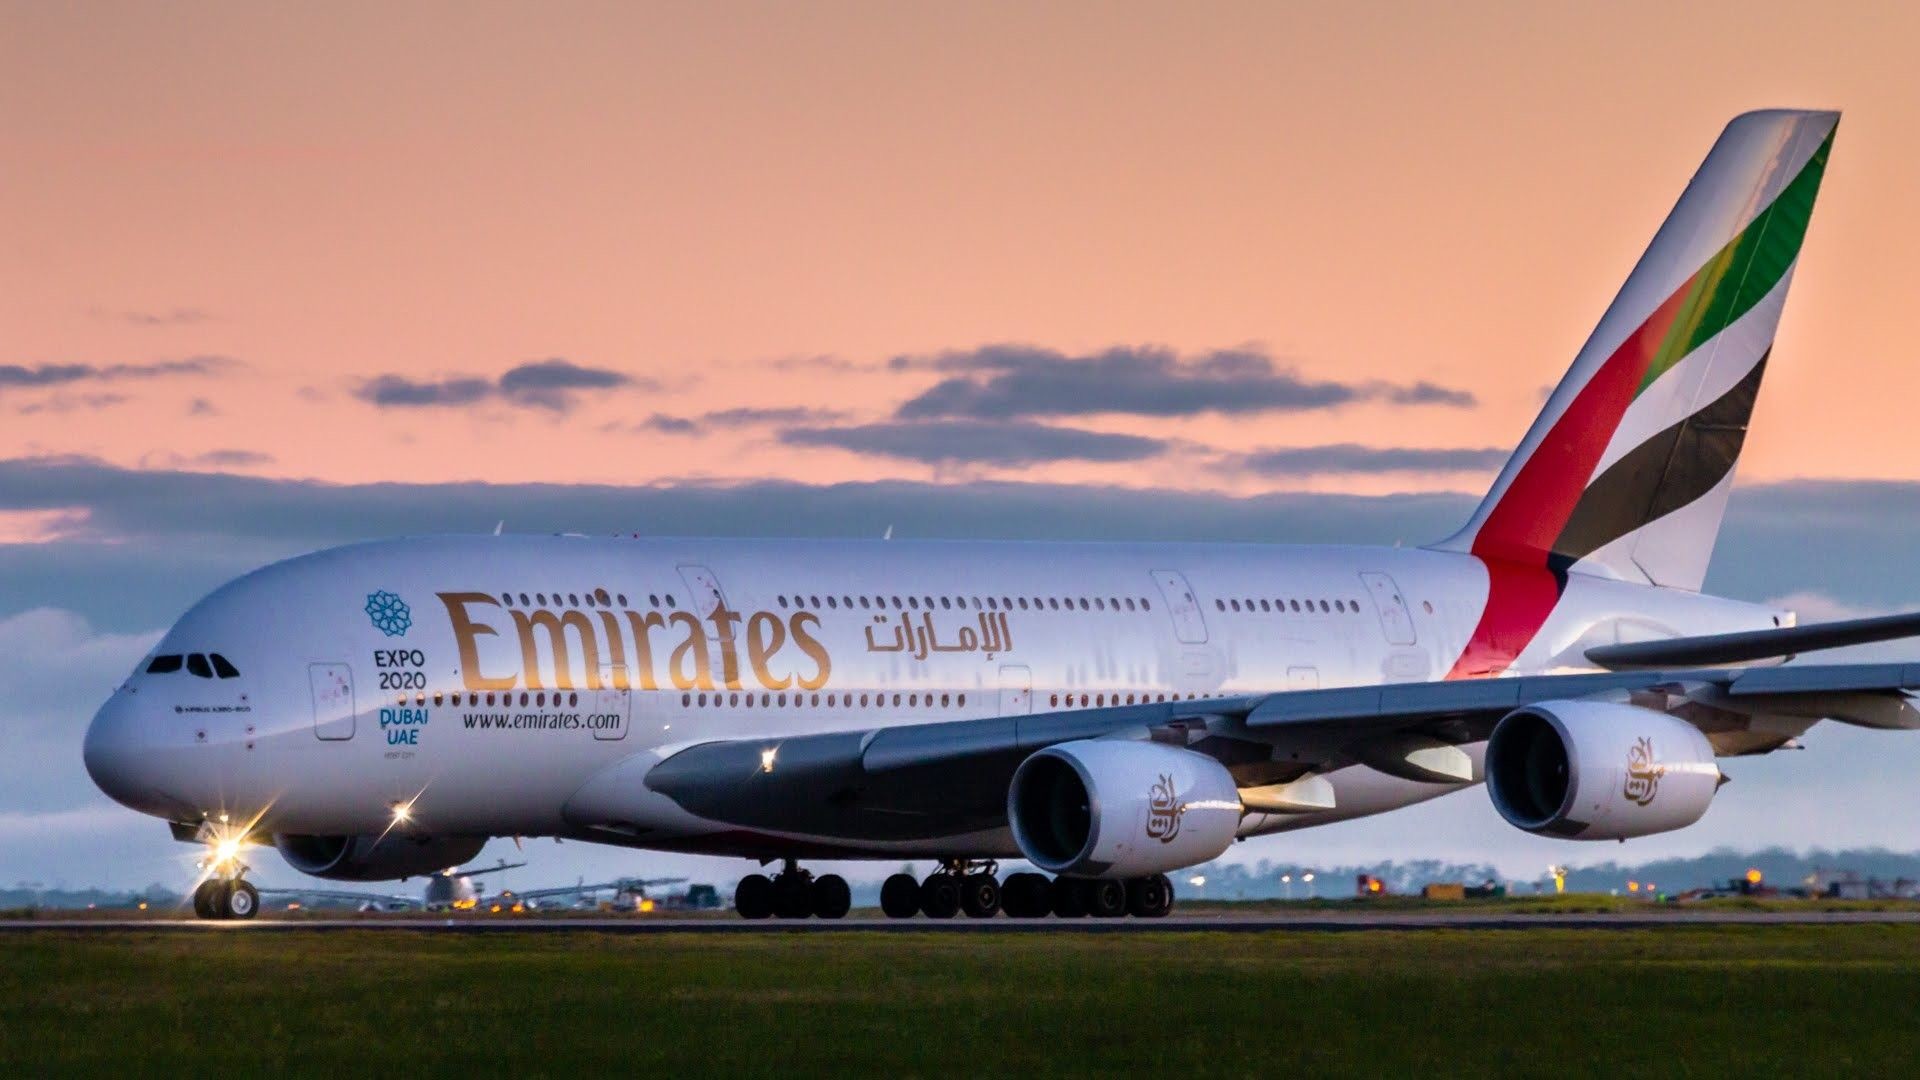 1920x1080 Airbus A380 Wallpaper (74+ images)